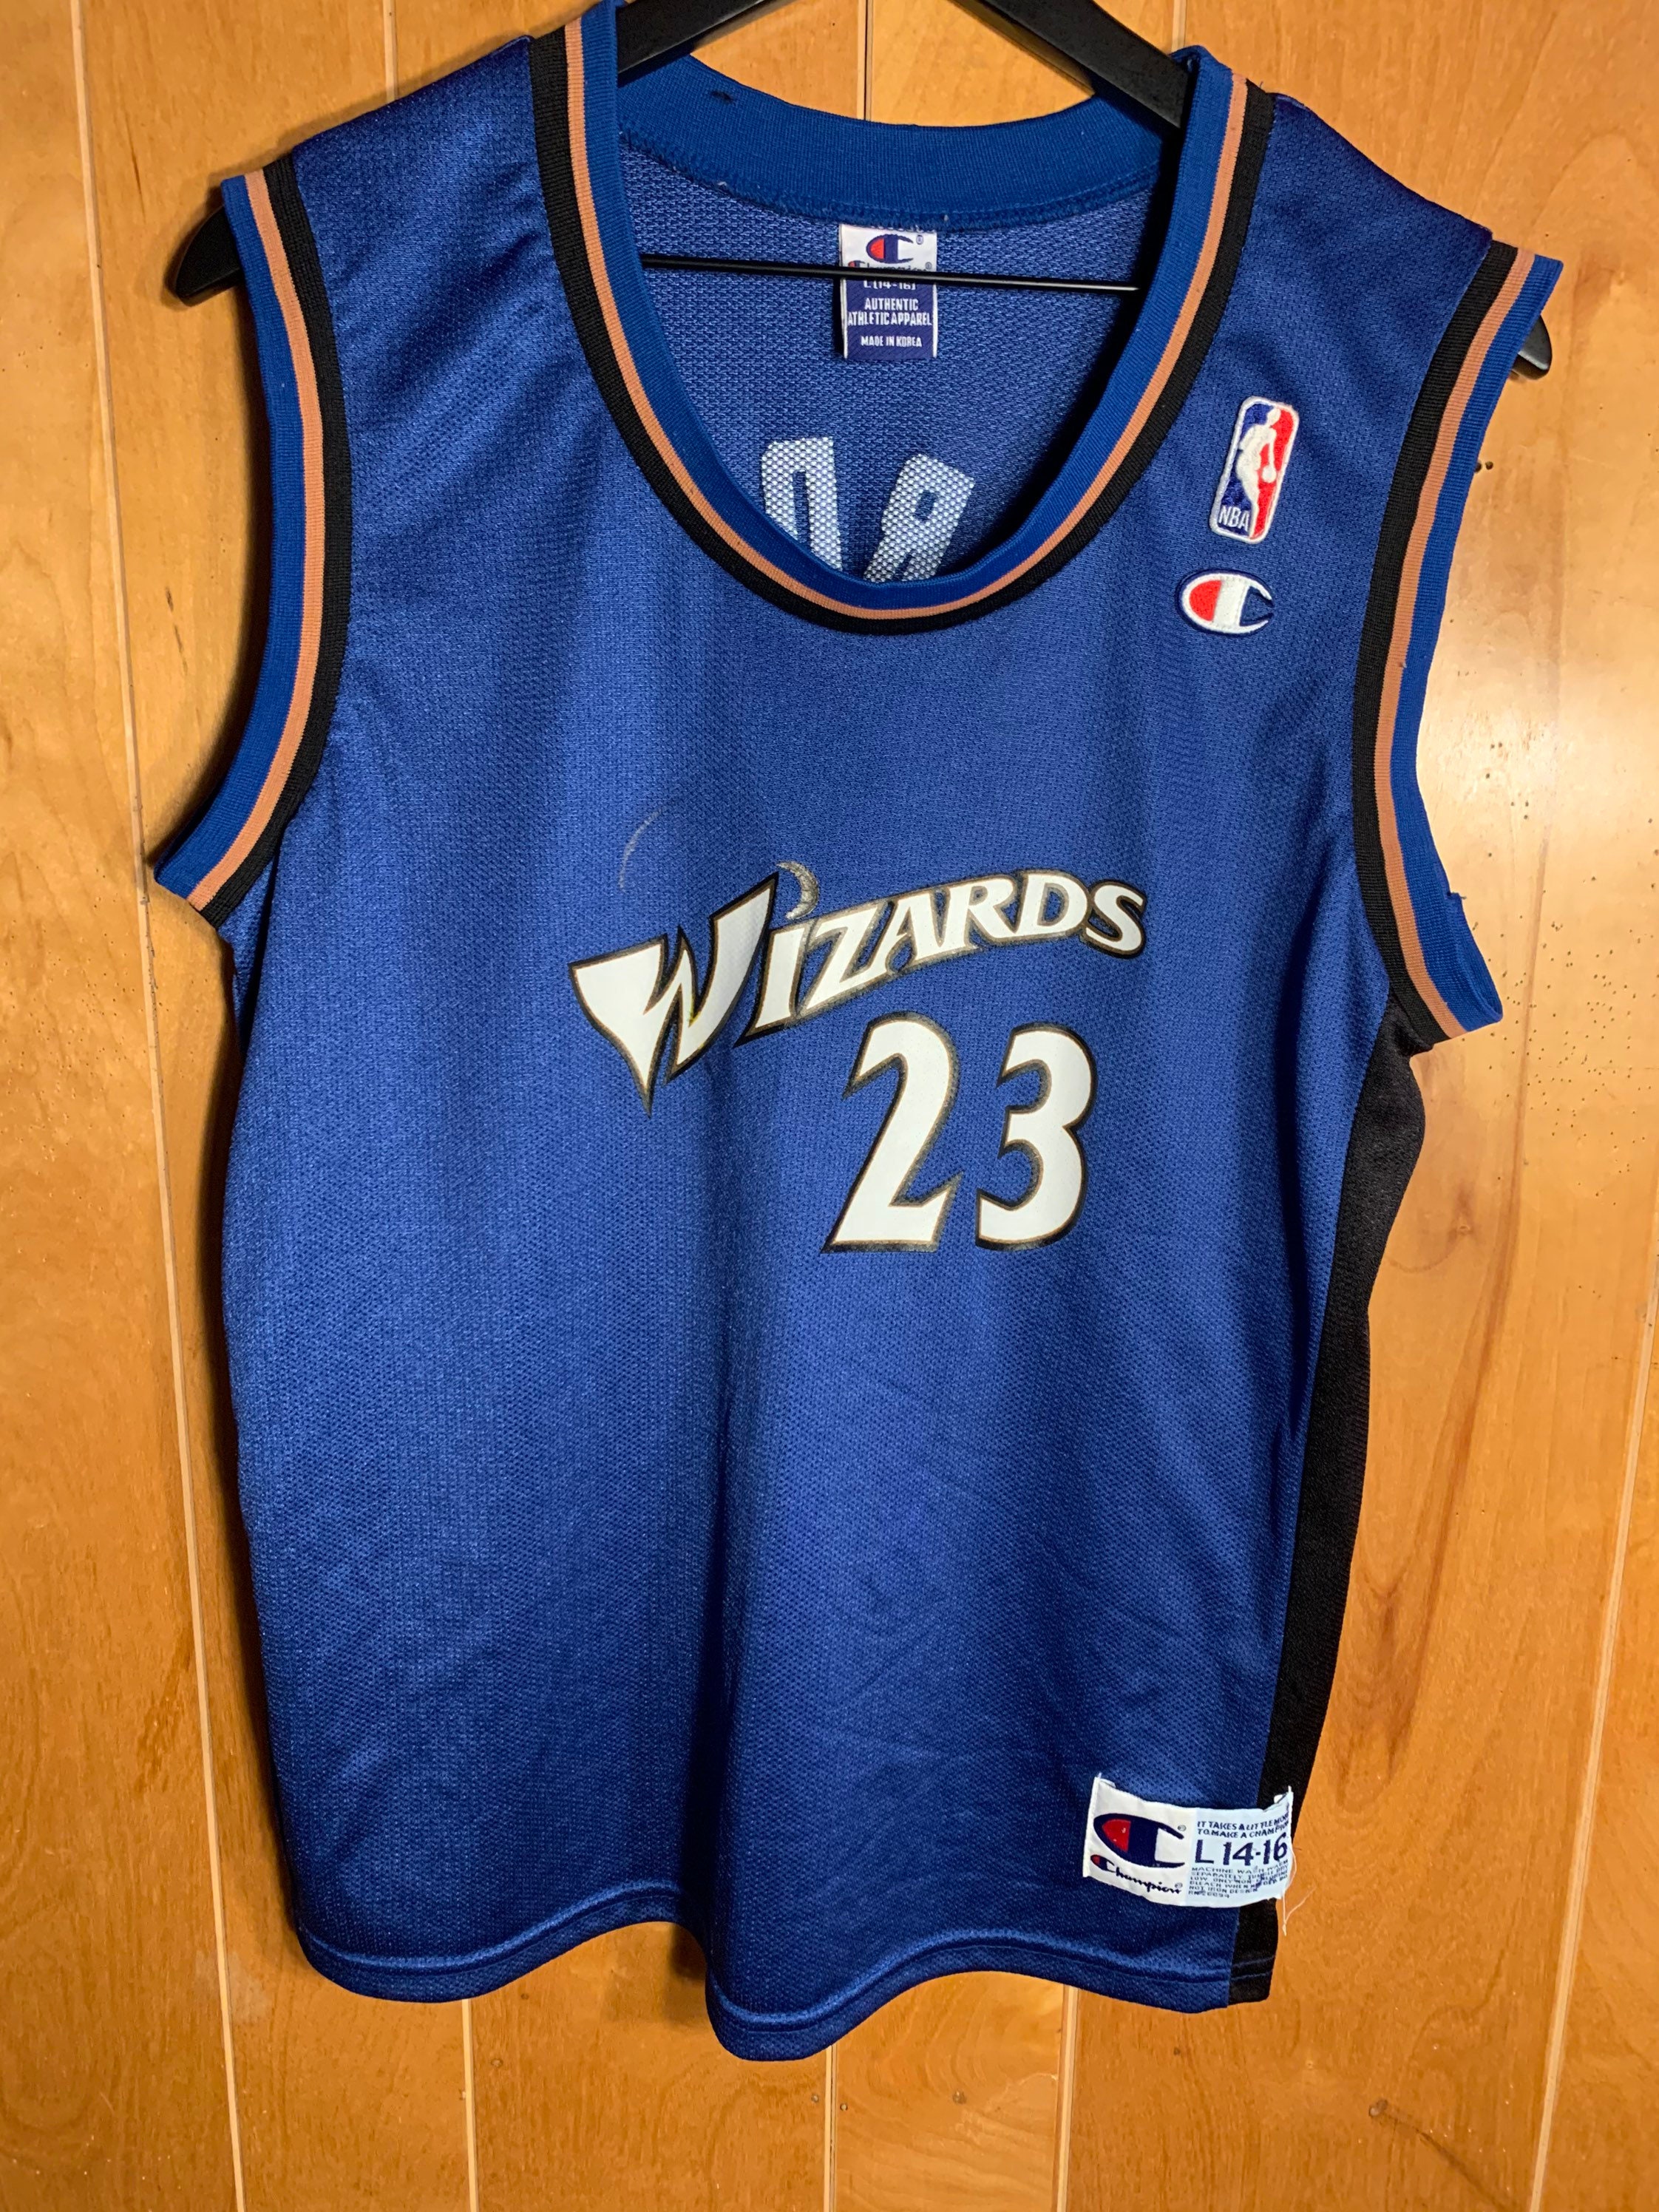 Wizards 23 Jersey - Etsy